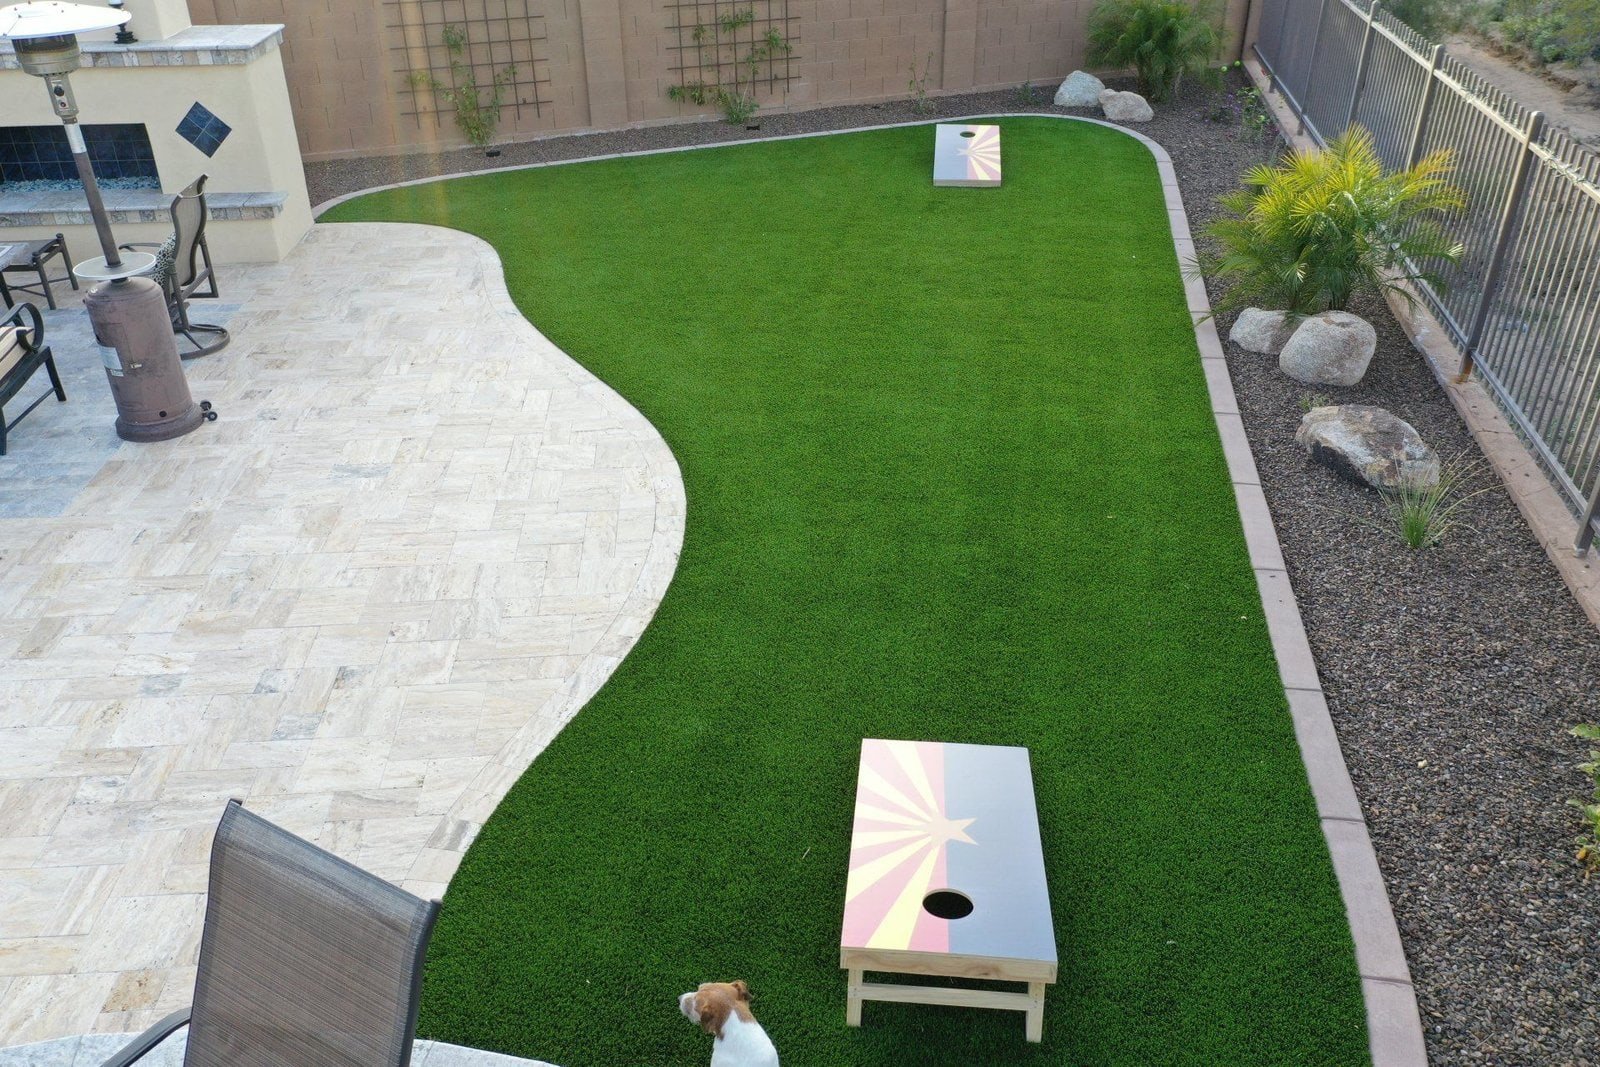 A backyard in Houston, TX, boasts a lush artificial turf lawn with two cornhole boards. There is a paved patio area adorned with chairs, a fire pit, and other outdoor furniture. A small dog sits at the edge of the turf, while pristine landscaping is enclosed by a fence and stone wall.